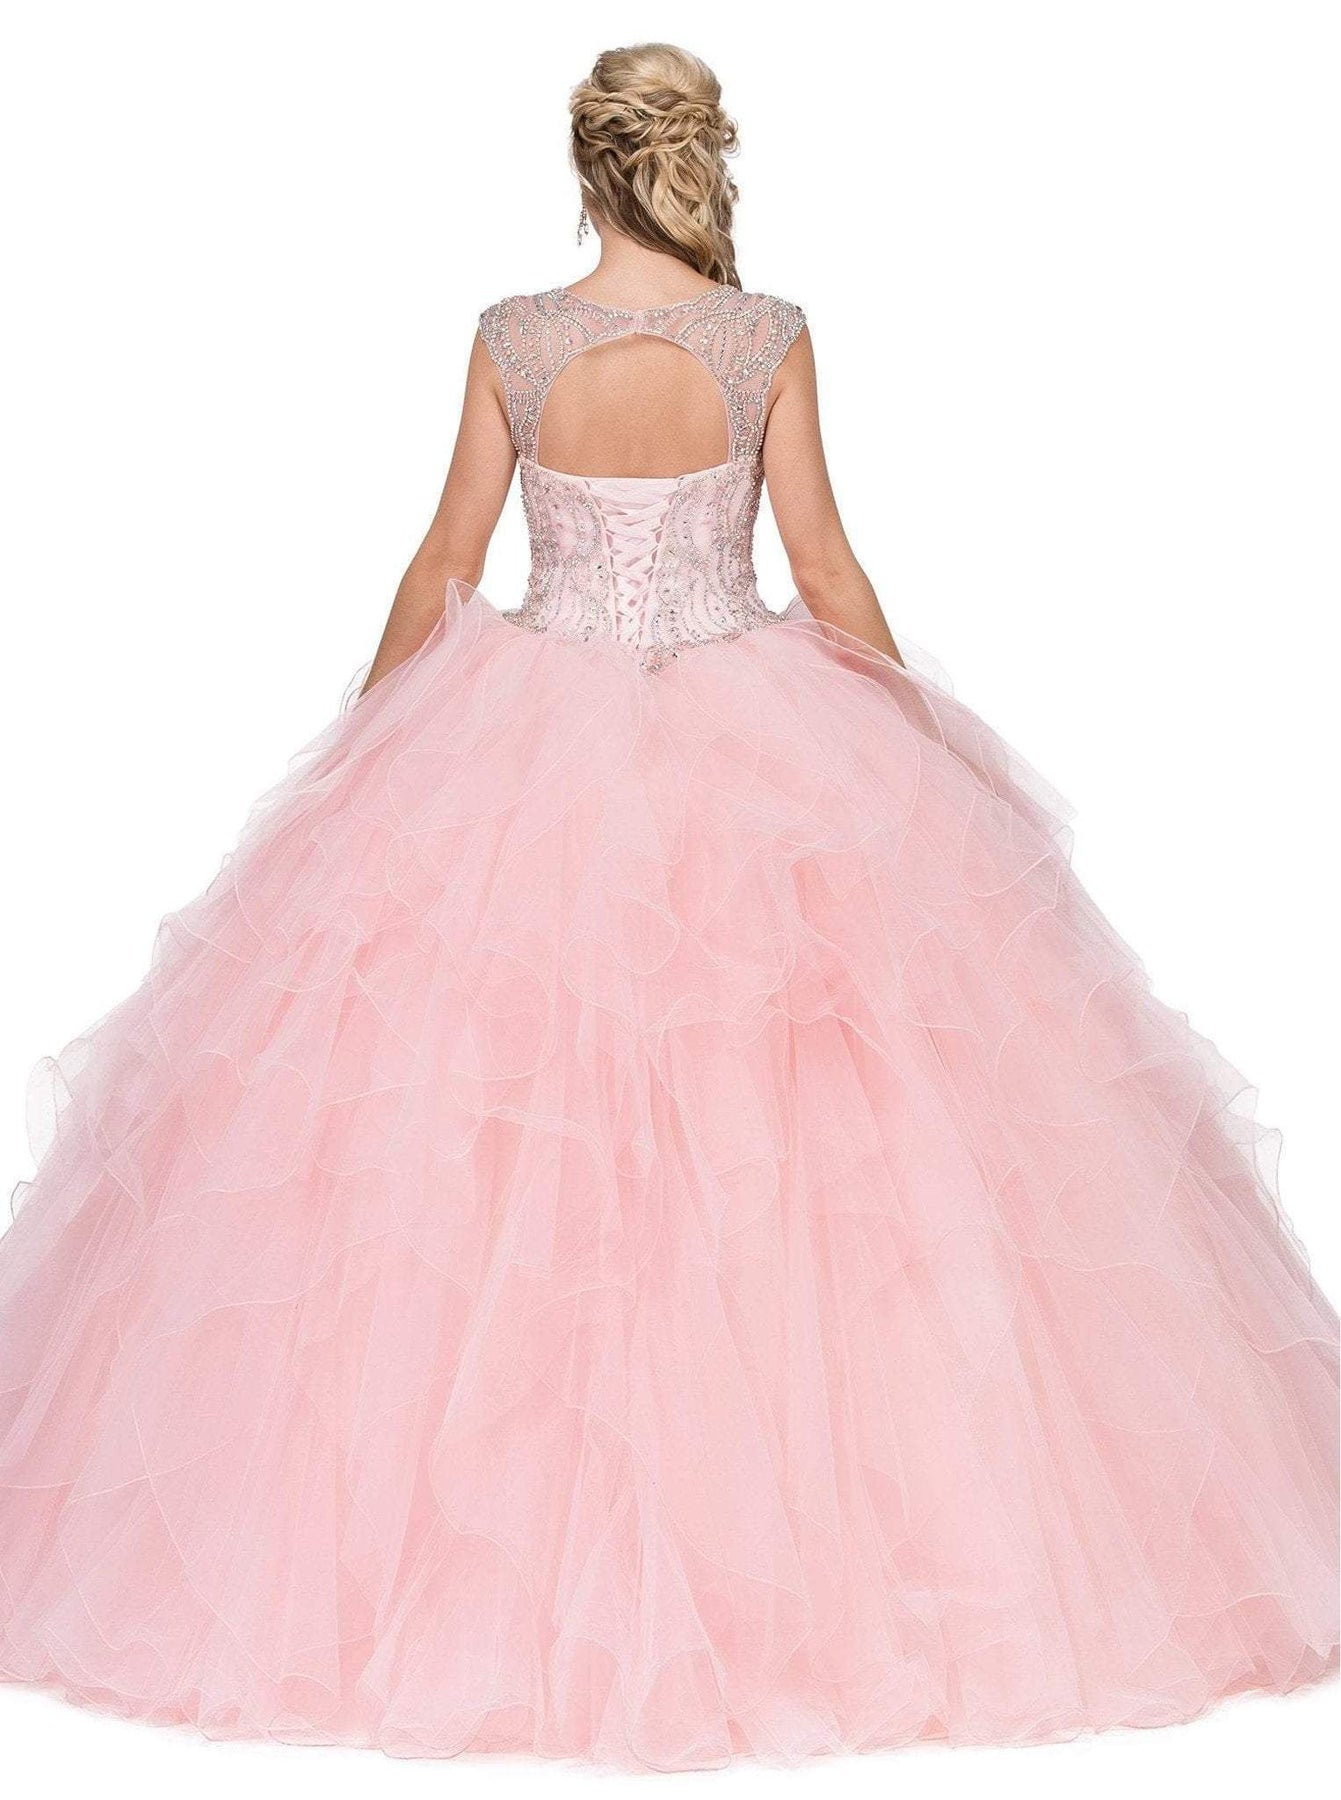 Dancing Queen - 1272 Beaded Sweetheart Ruffled Quinceanera Gown Special Occasion Dress